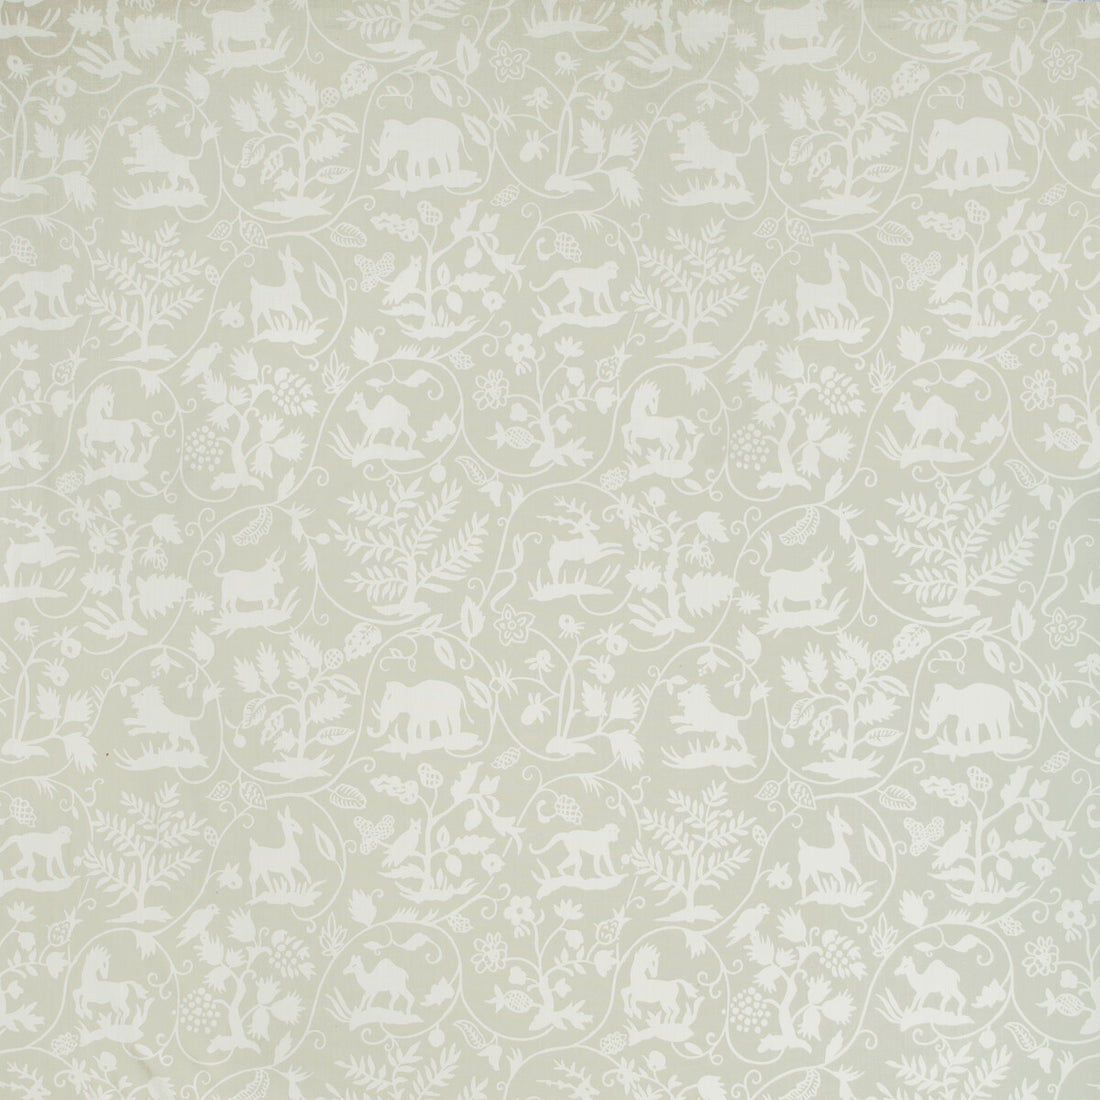 Animaltale fabric in pumice color - pattern ANIMALTALE.16.0 - by Kravet Basics in the Bermuda collection